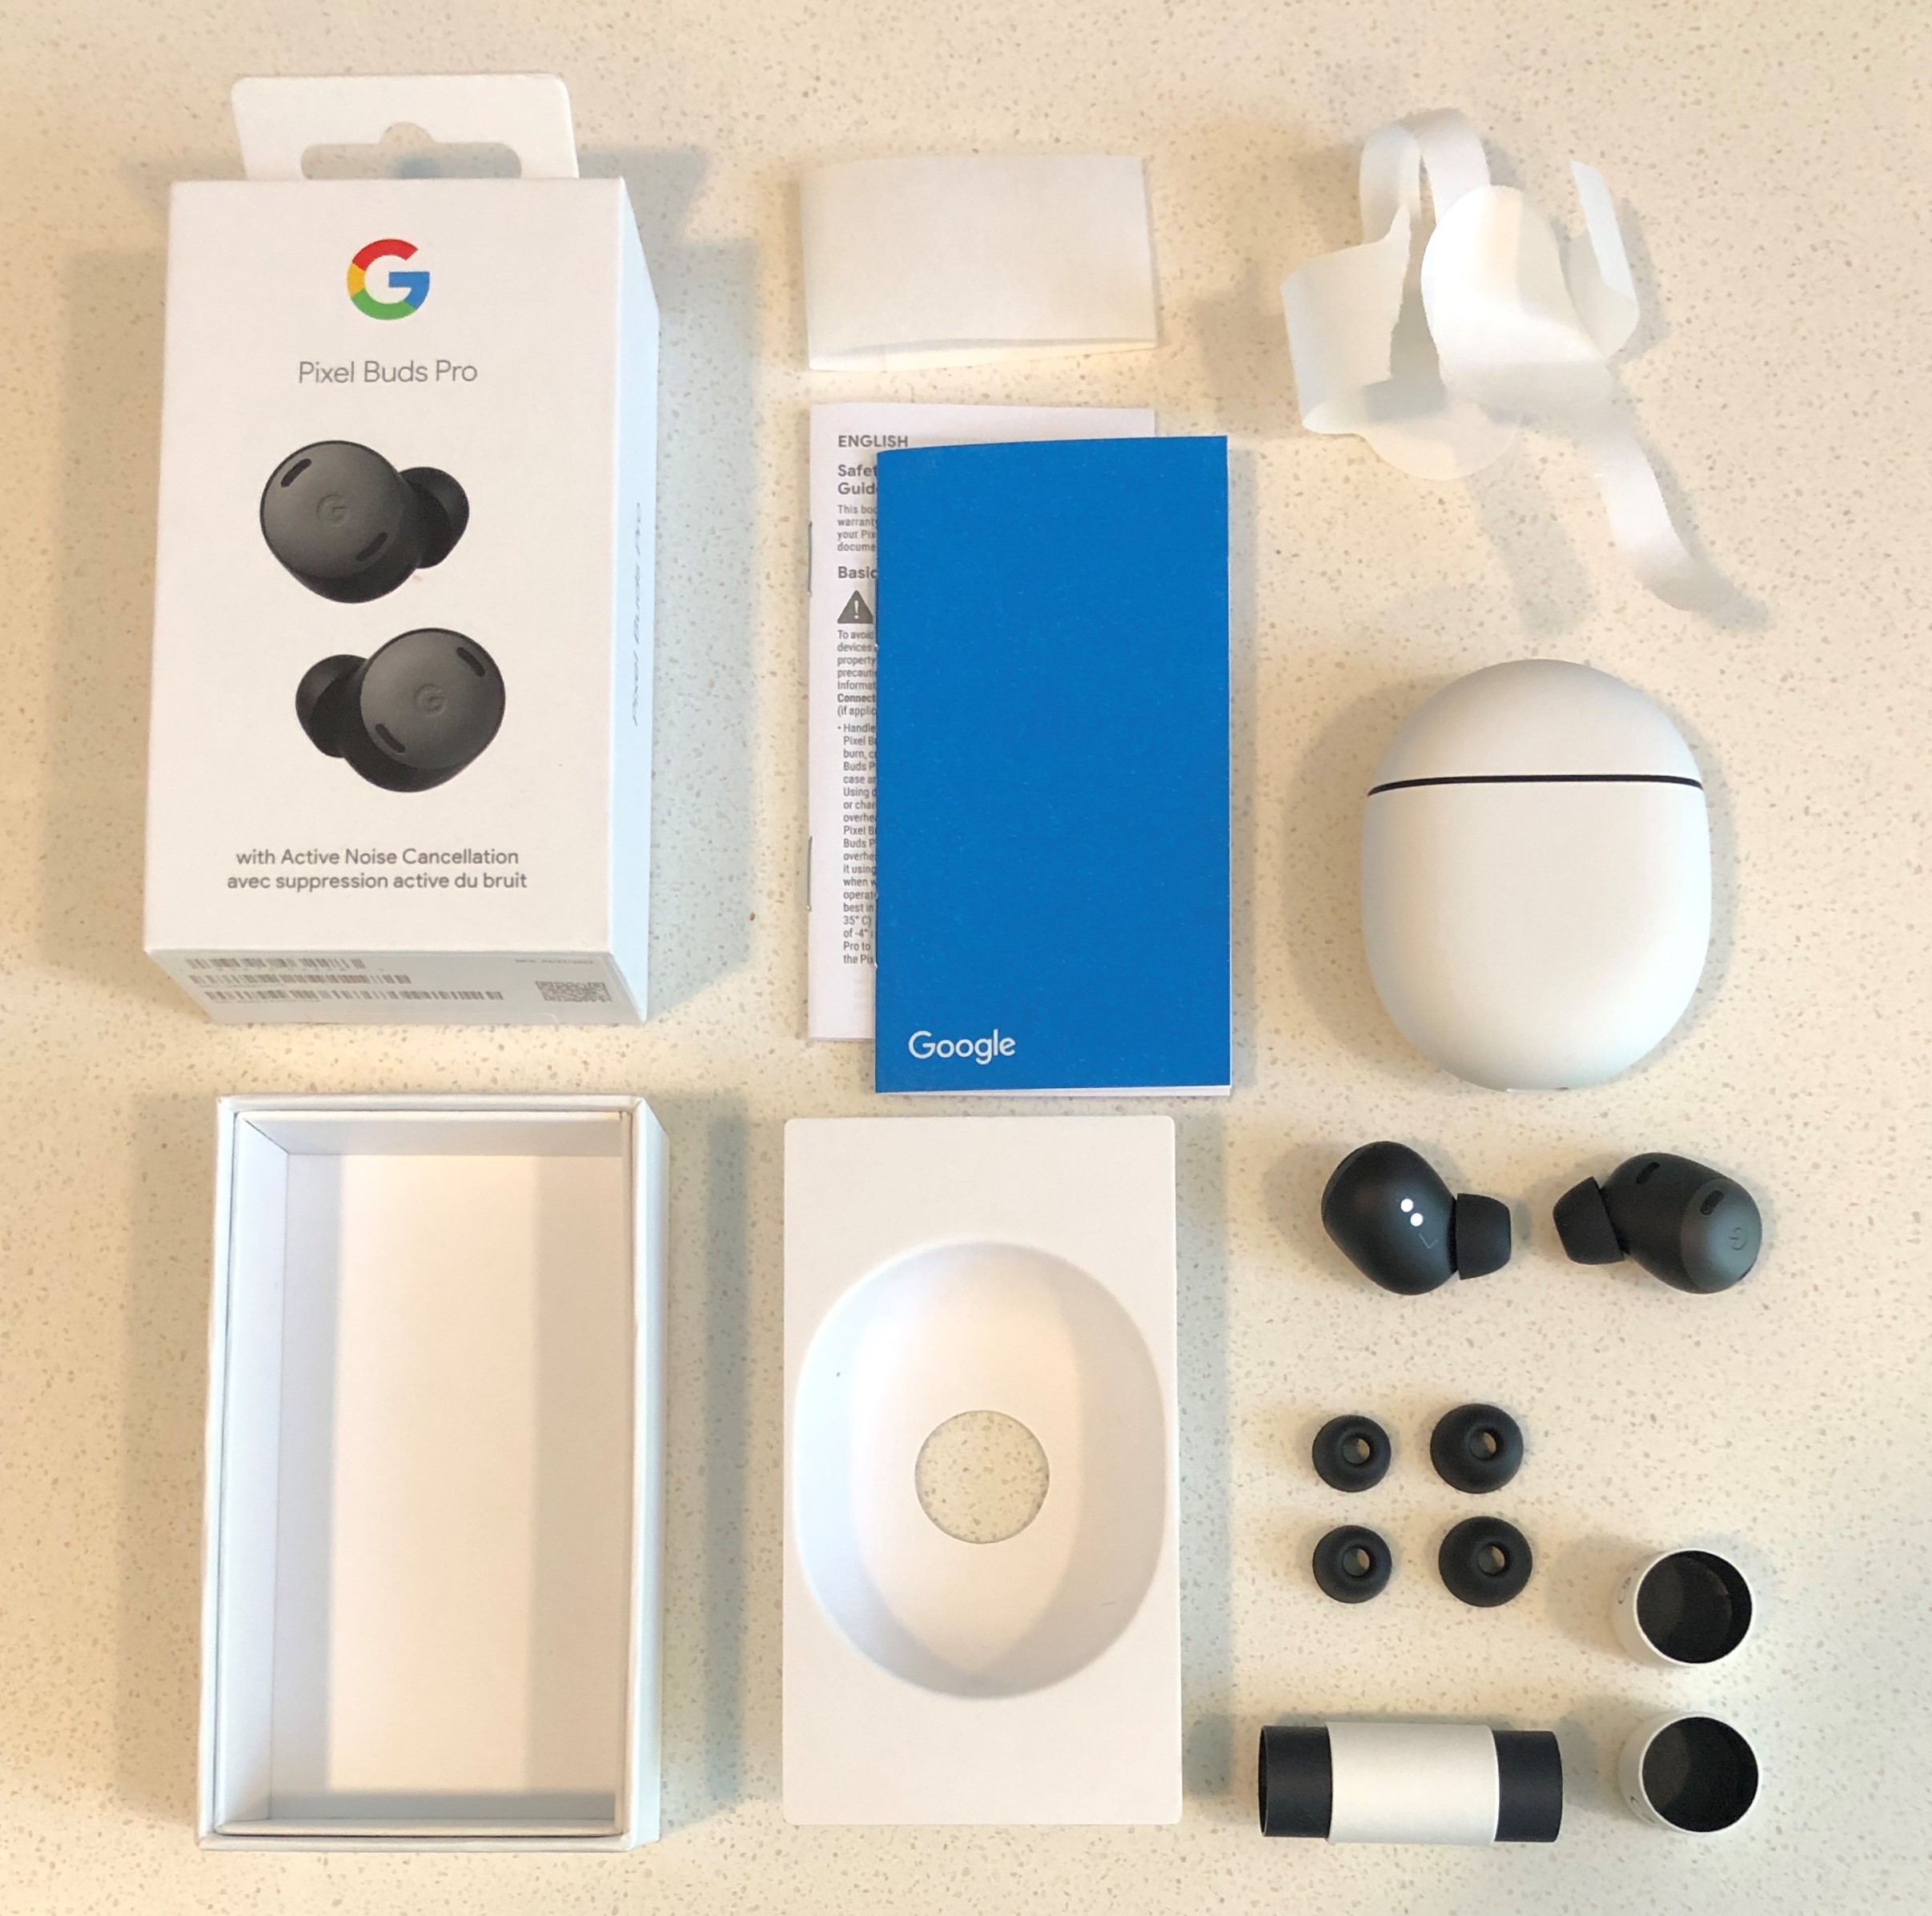 Google Pixel Buds Pro out of the box accessories